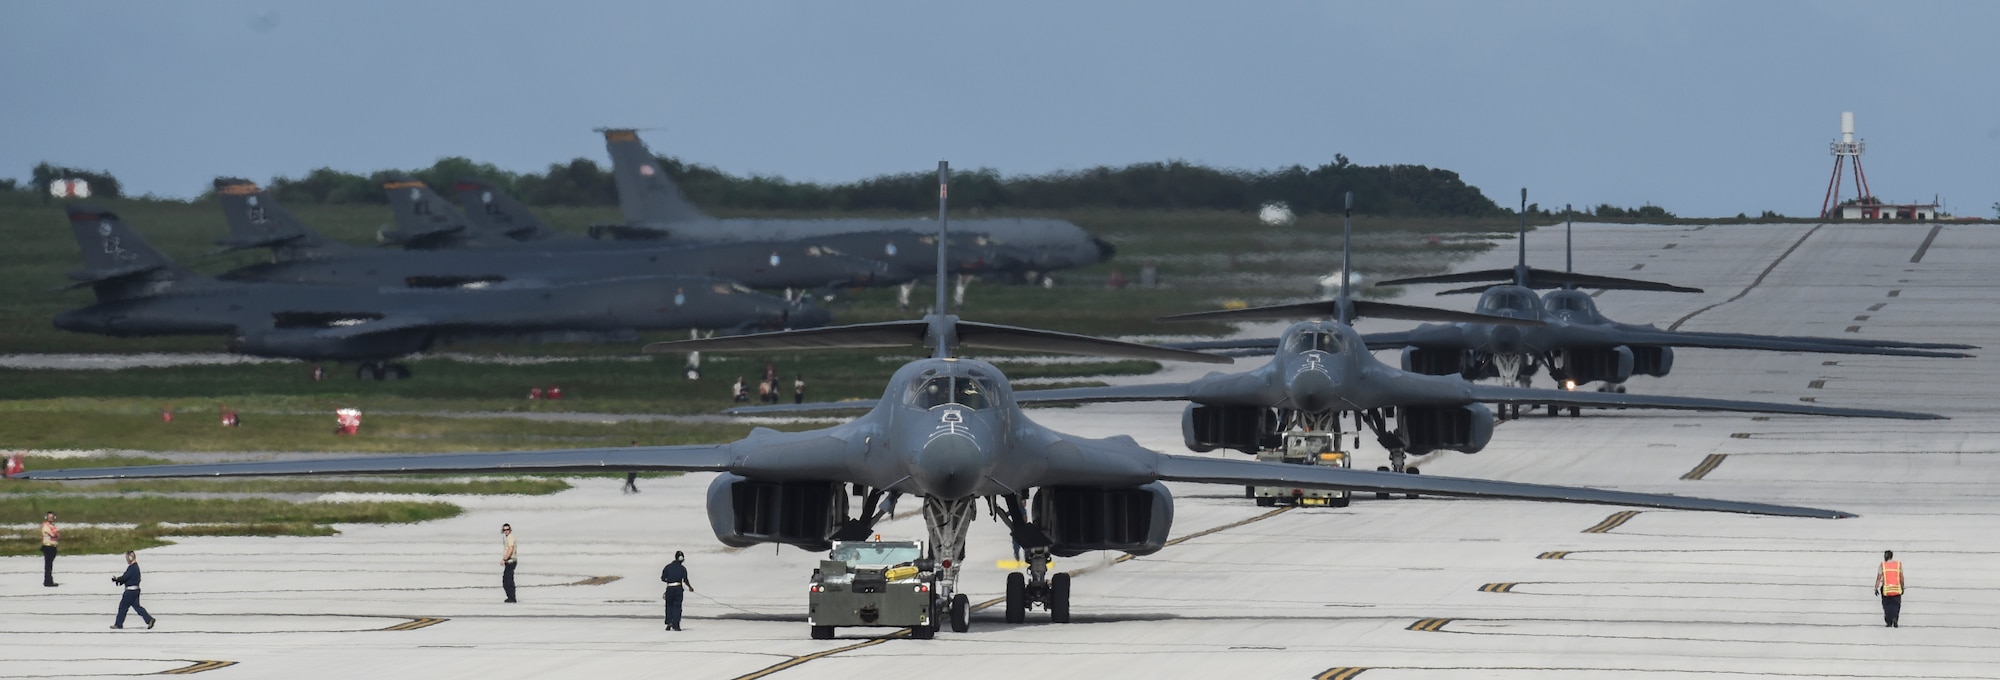 Four U.S. Air Force B-1B Lancers assigned to the 9th Expeditionary Bomb Squadron, deployed from Dyess Air Force Base, Texas, arrive Feb. 6, 2017, at Andersen AFB, Guam. The 9th EBS is taking over U.S. Pacific Command’s Continuous Bomber Presence operations from the 34th EBS, assigned to Ellsworth Air Force Base, S.D. The B-1B’s speed and superior handling characteristics allow it to seamlessly integrate in mixed force packages. These capabilities, when combined with its substantial payload, excellent radar targeting system, long loiter time and survivability, make the B-1B a key element of any joint/composite strike force. While deployed at Guam the B-1Bs will continue conducting flight operations where international law permit.  (U.S. Air Force photo by Tech. Sgt. Richard P. Ebensberger/Released)